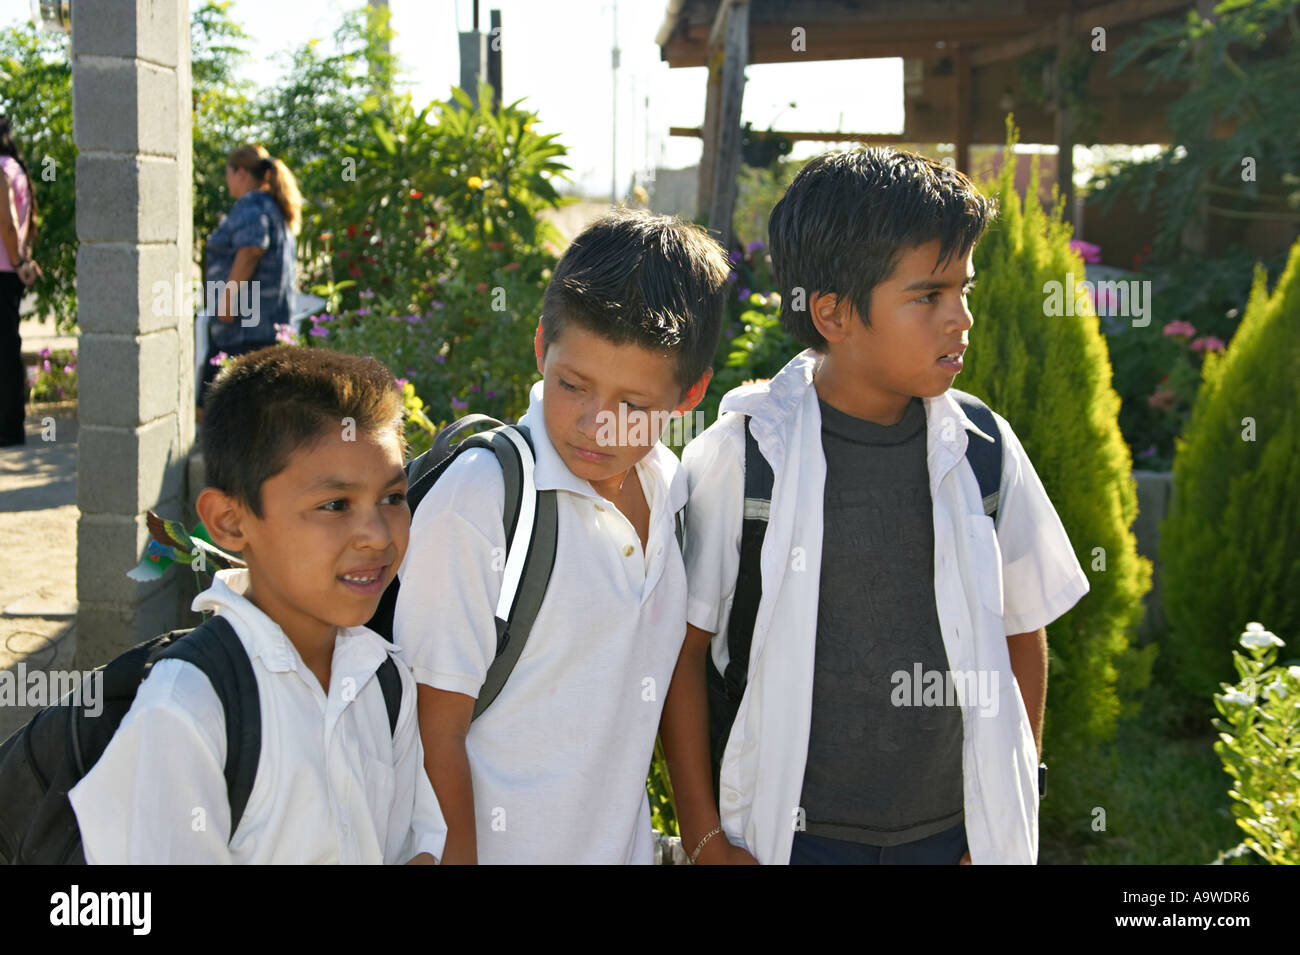 MEXICO La Paz Three Mexican school boys in school uniforms with backpacks white shirts walk home as group in neighborhood Stock Photo